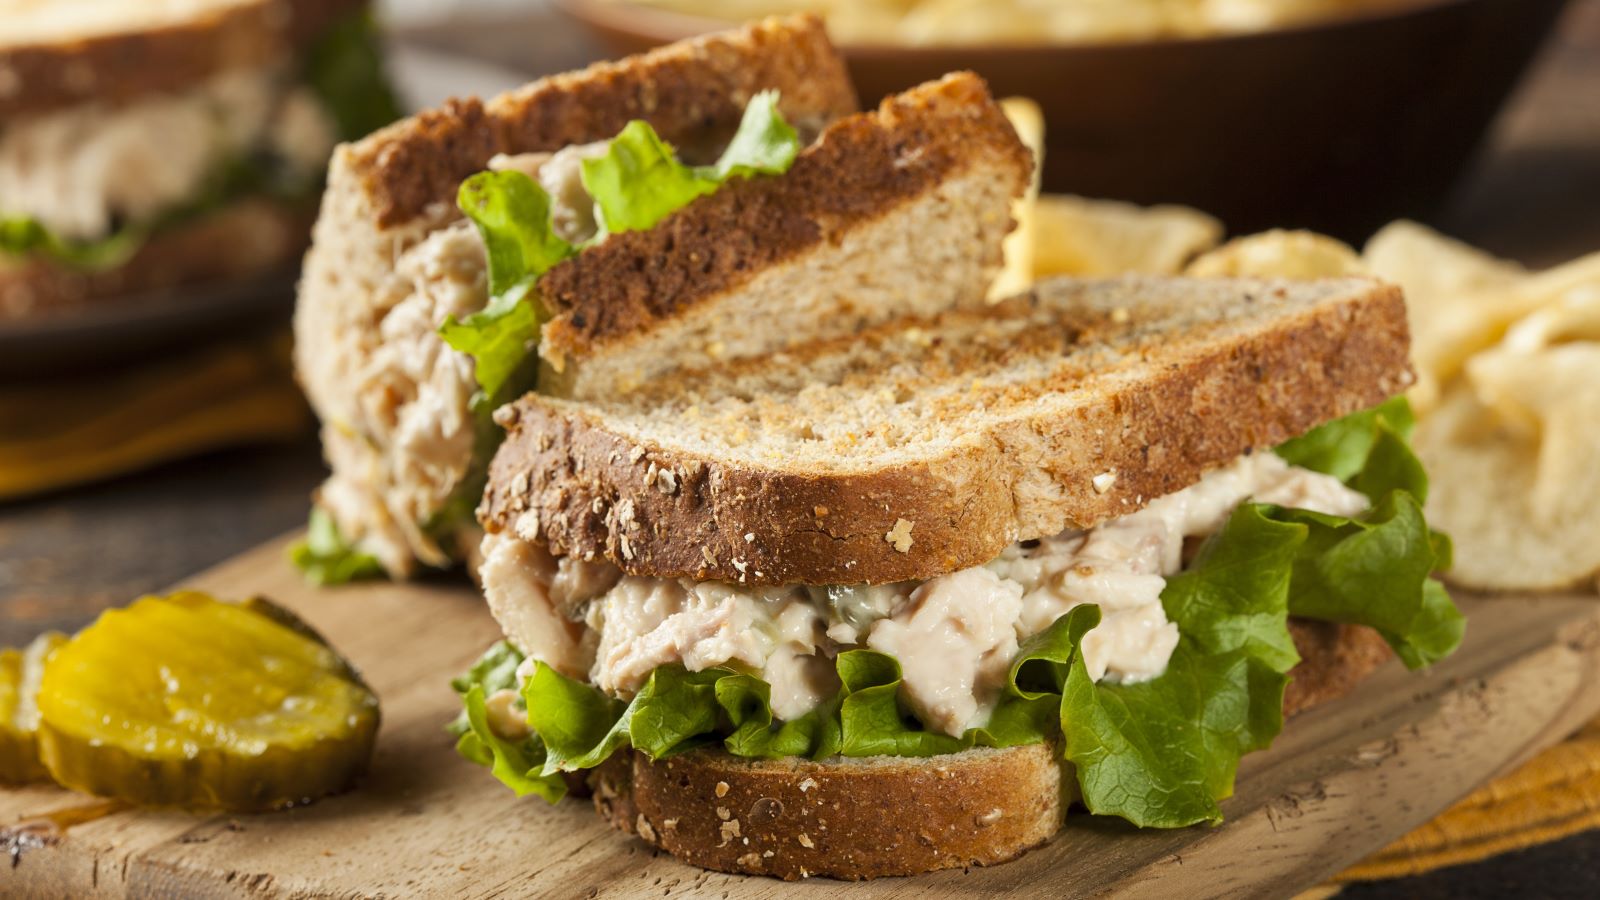 Can Too Much Tuna Cause Mercury Poisoning?